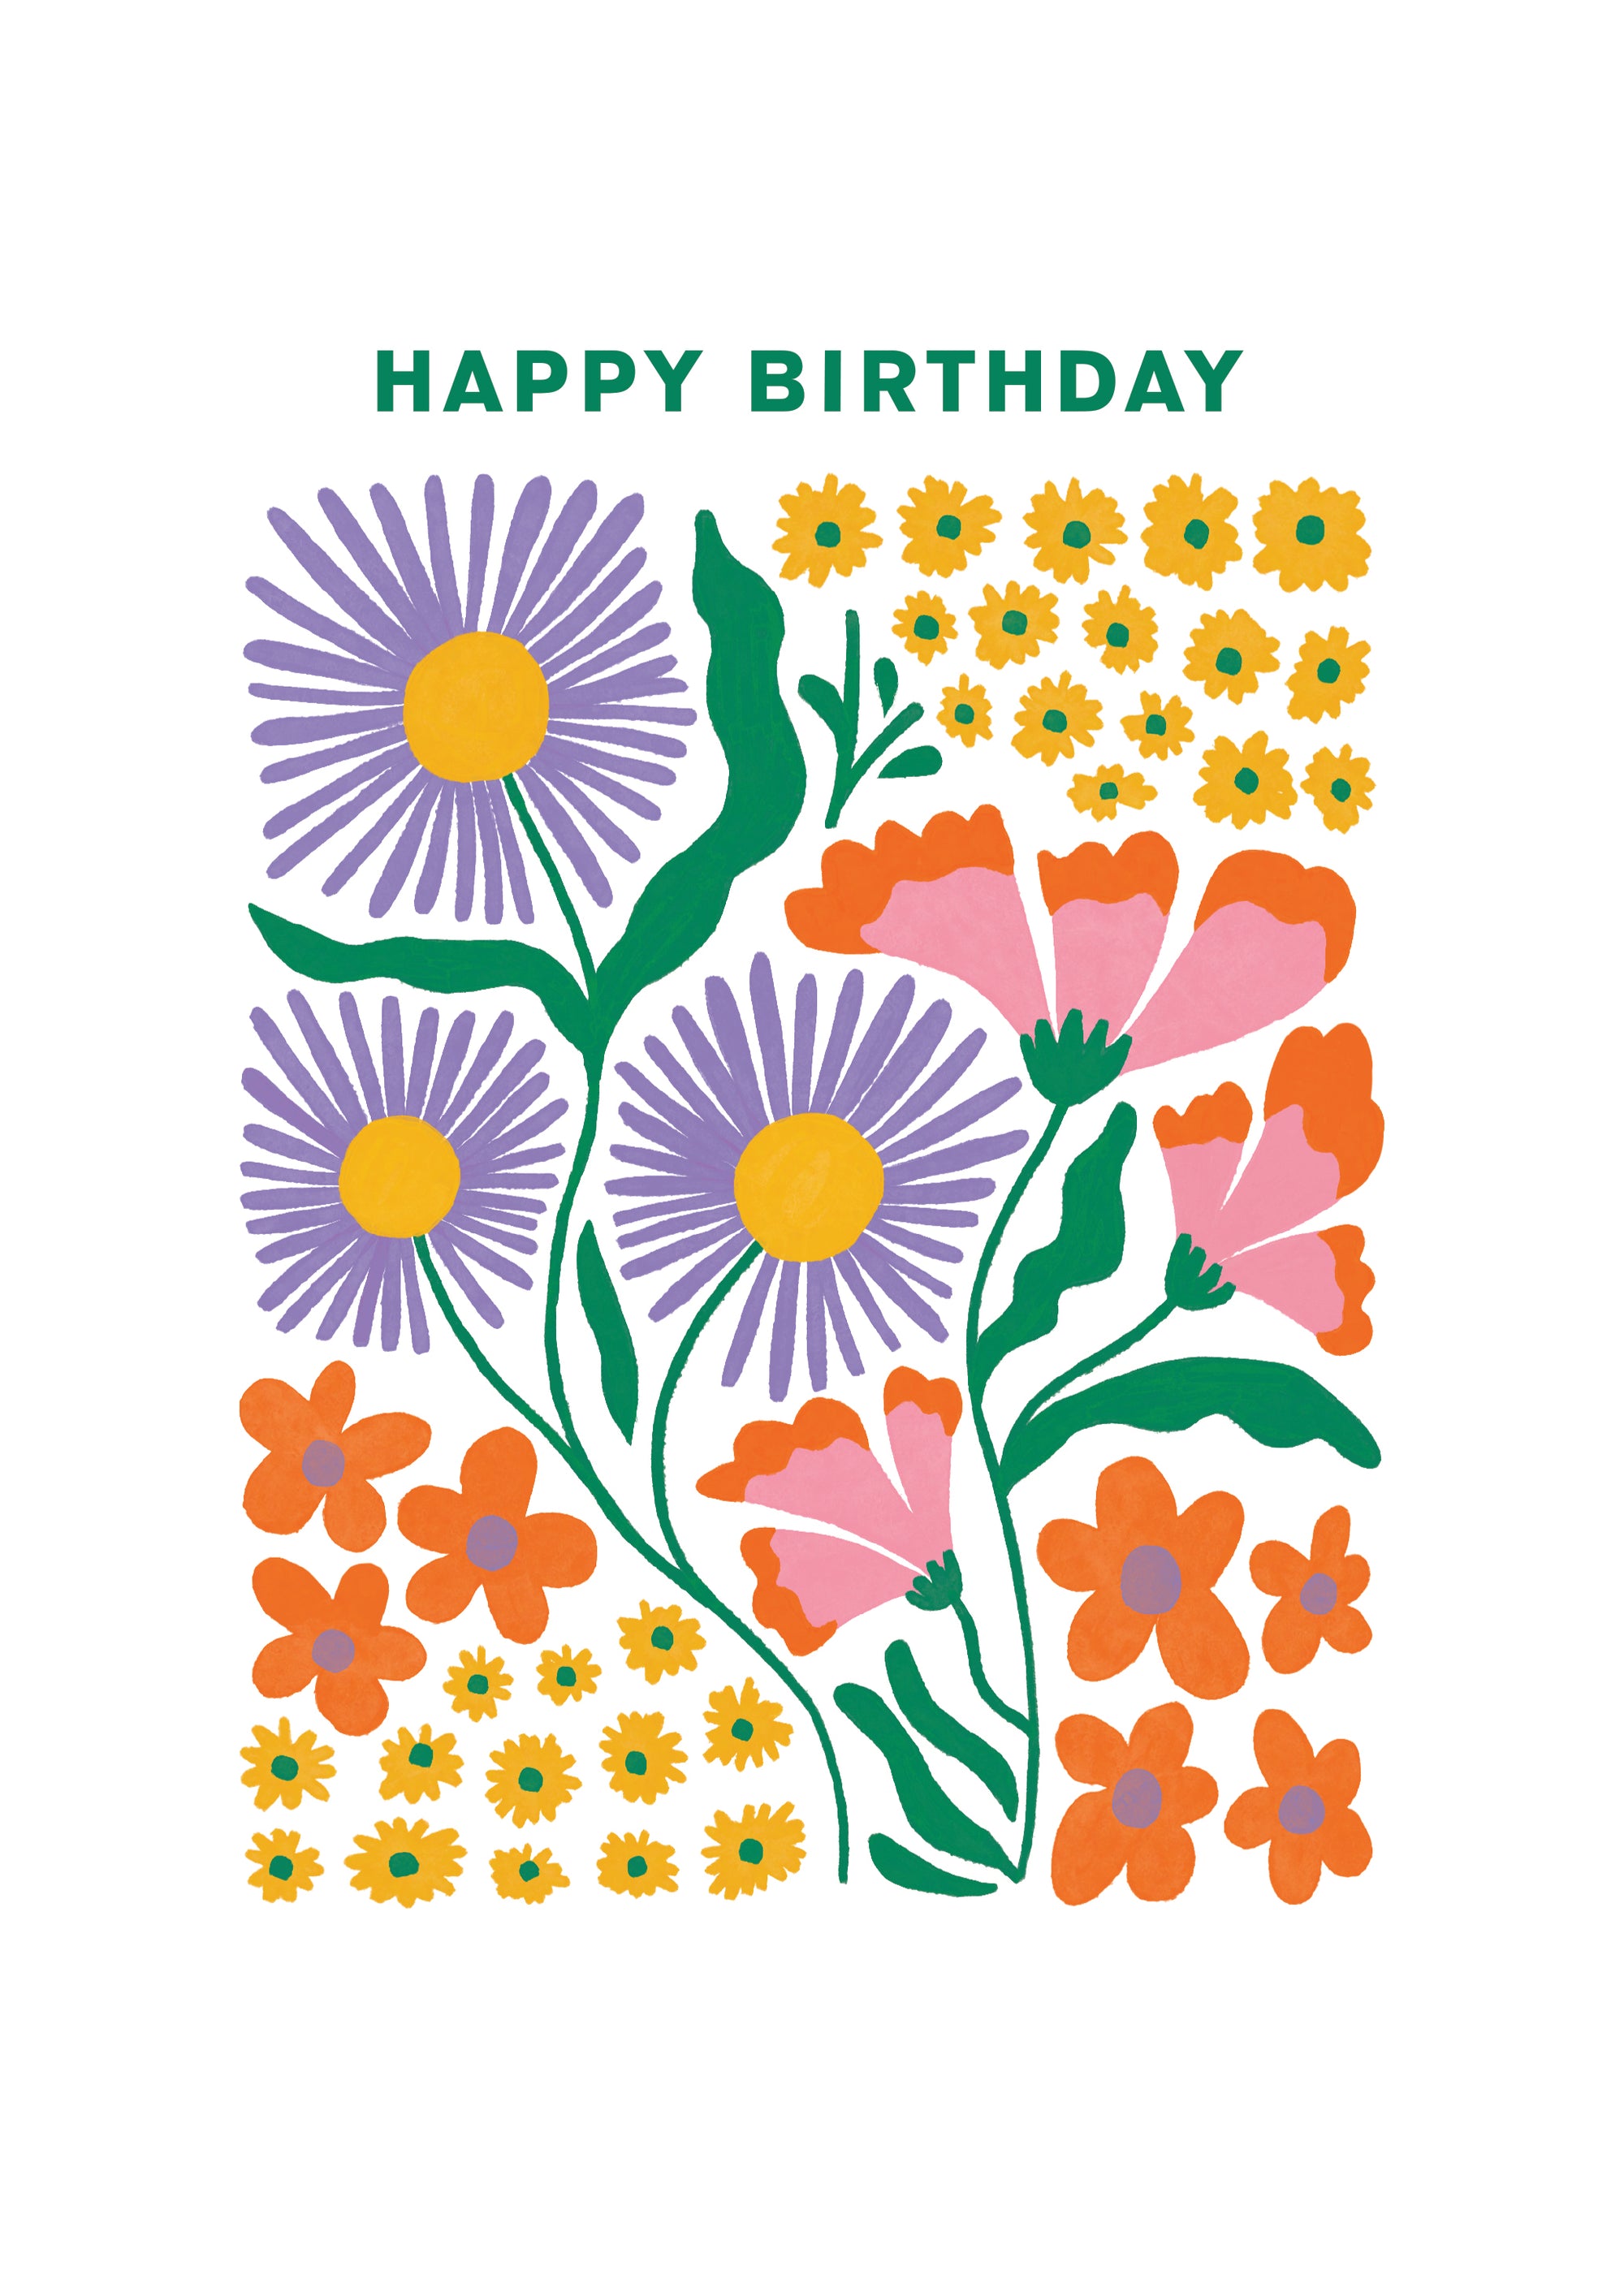 A greetings card with a white background and colourful graphically illustrated flowers. The words happy birthday are written above in green block capitals.